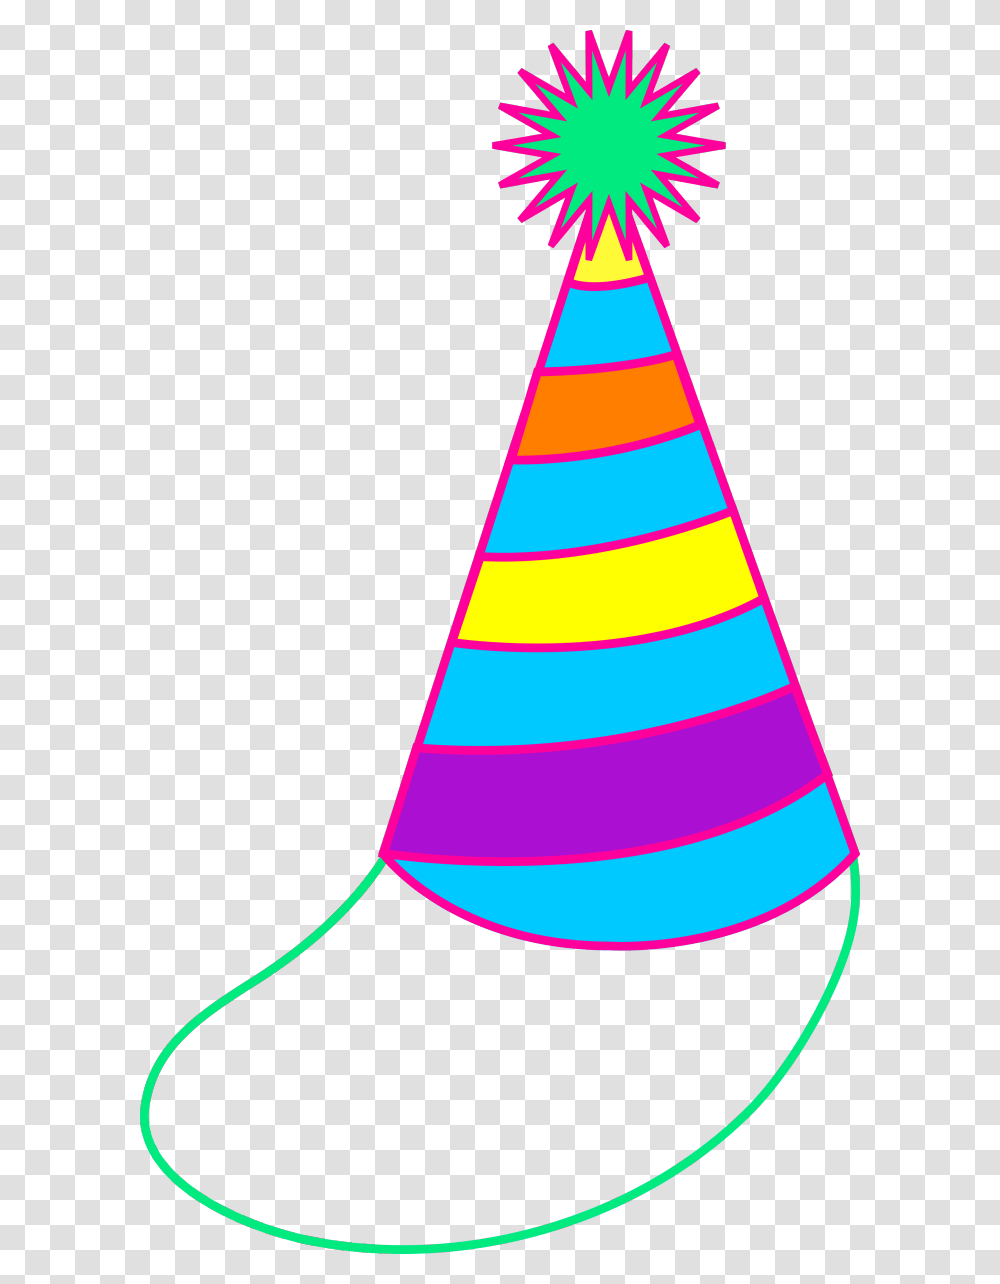 Party Hat Clip Art Birthday Border Free Image, Apparel, Cone Transparent Png